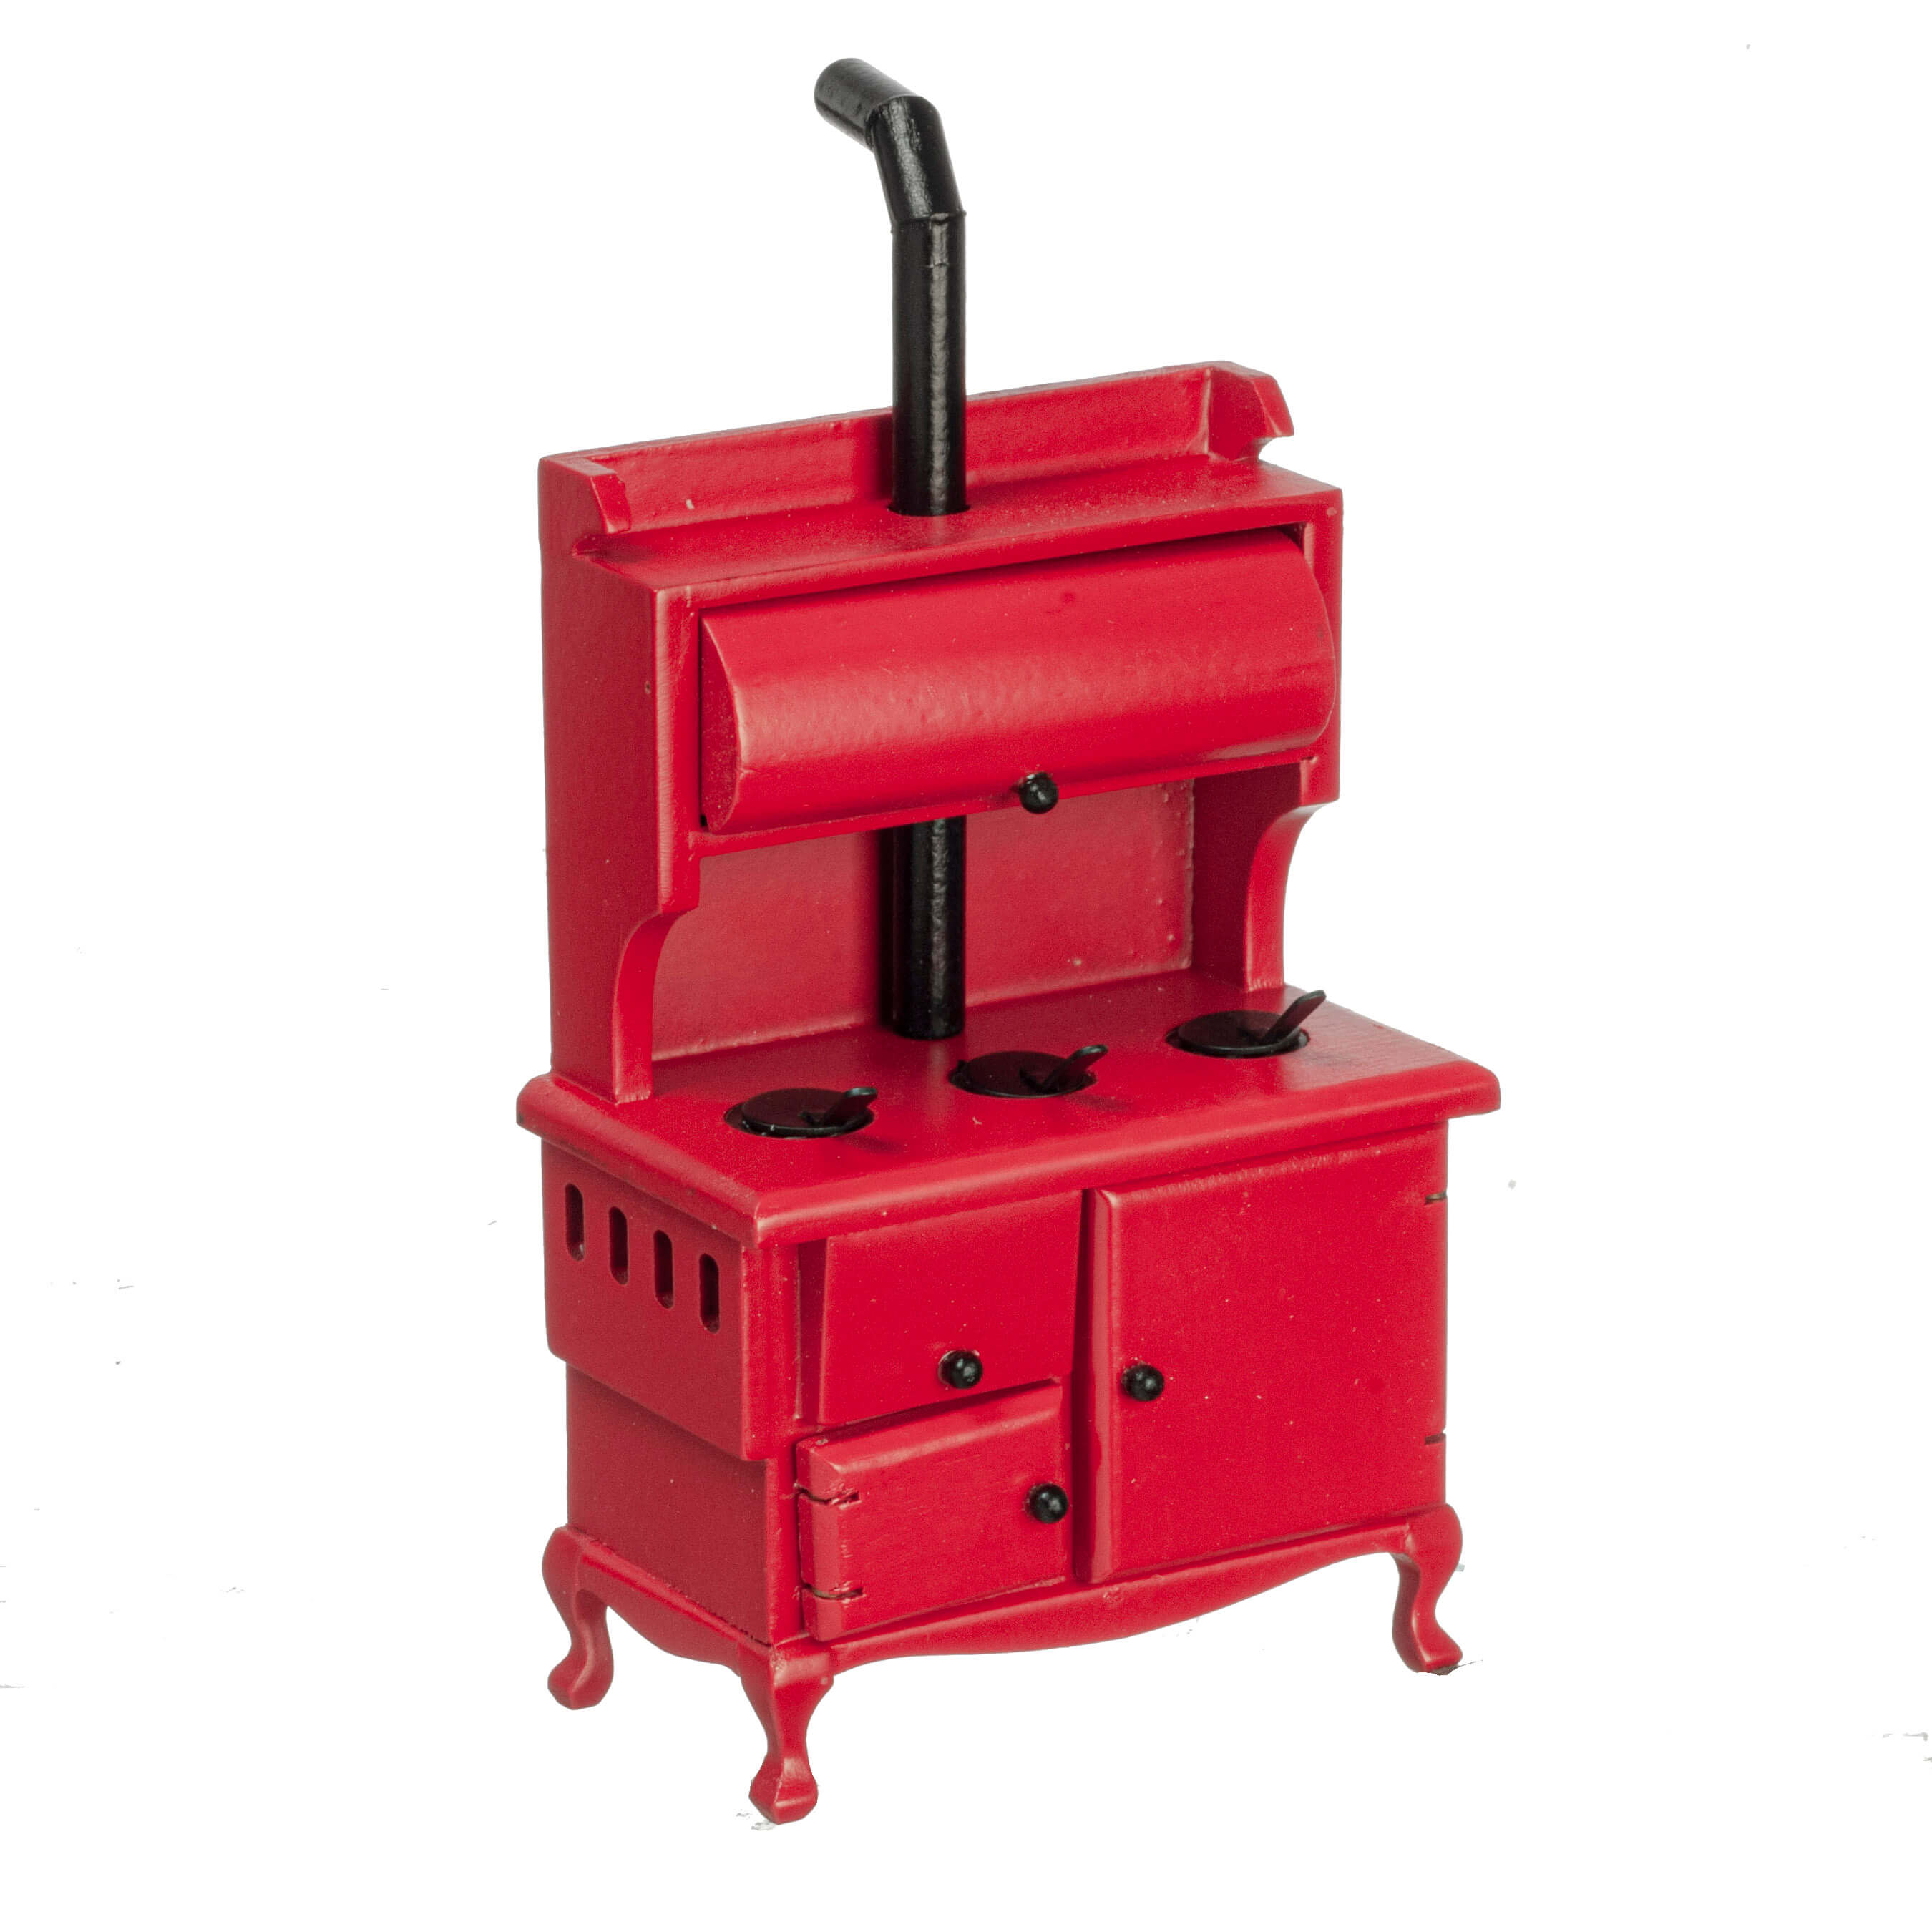 Old Fashioned Wood Stove - Red